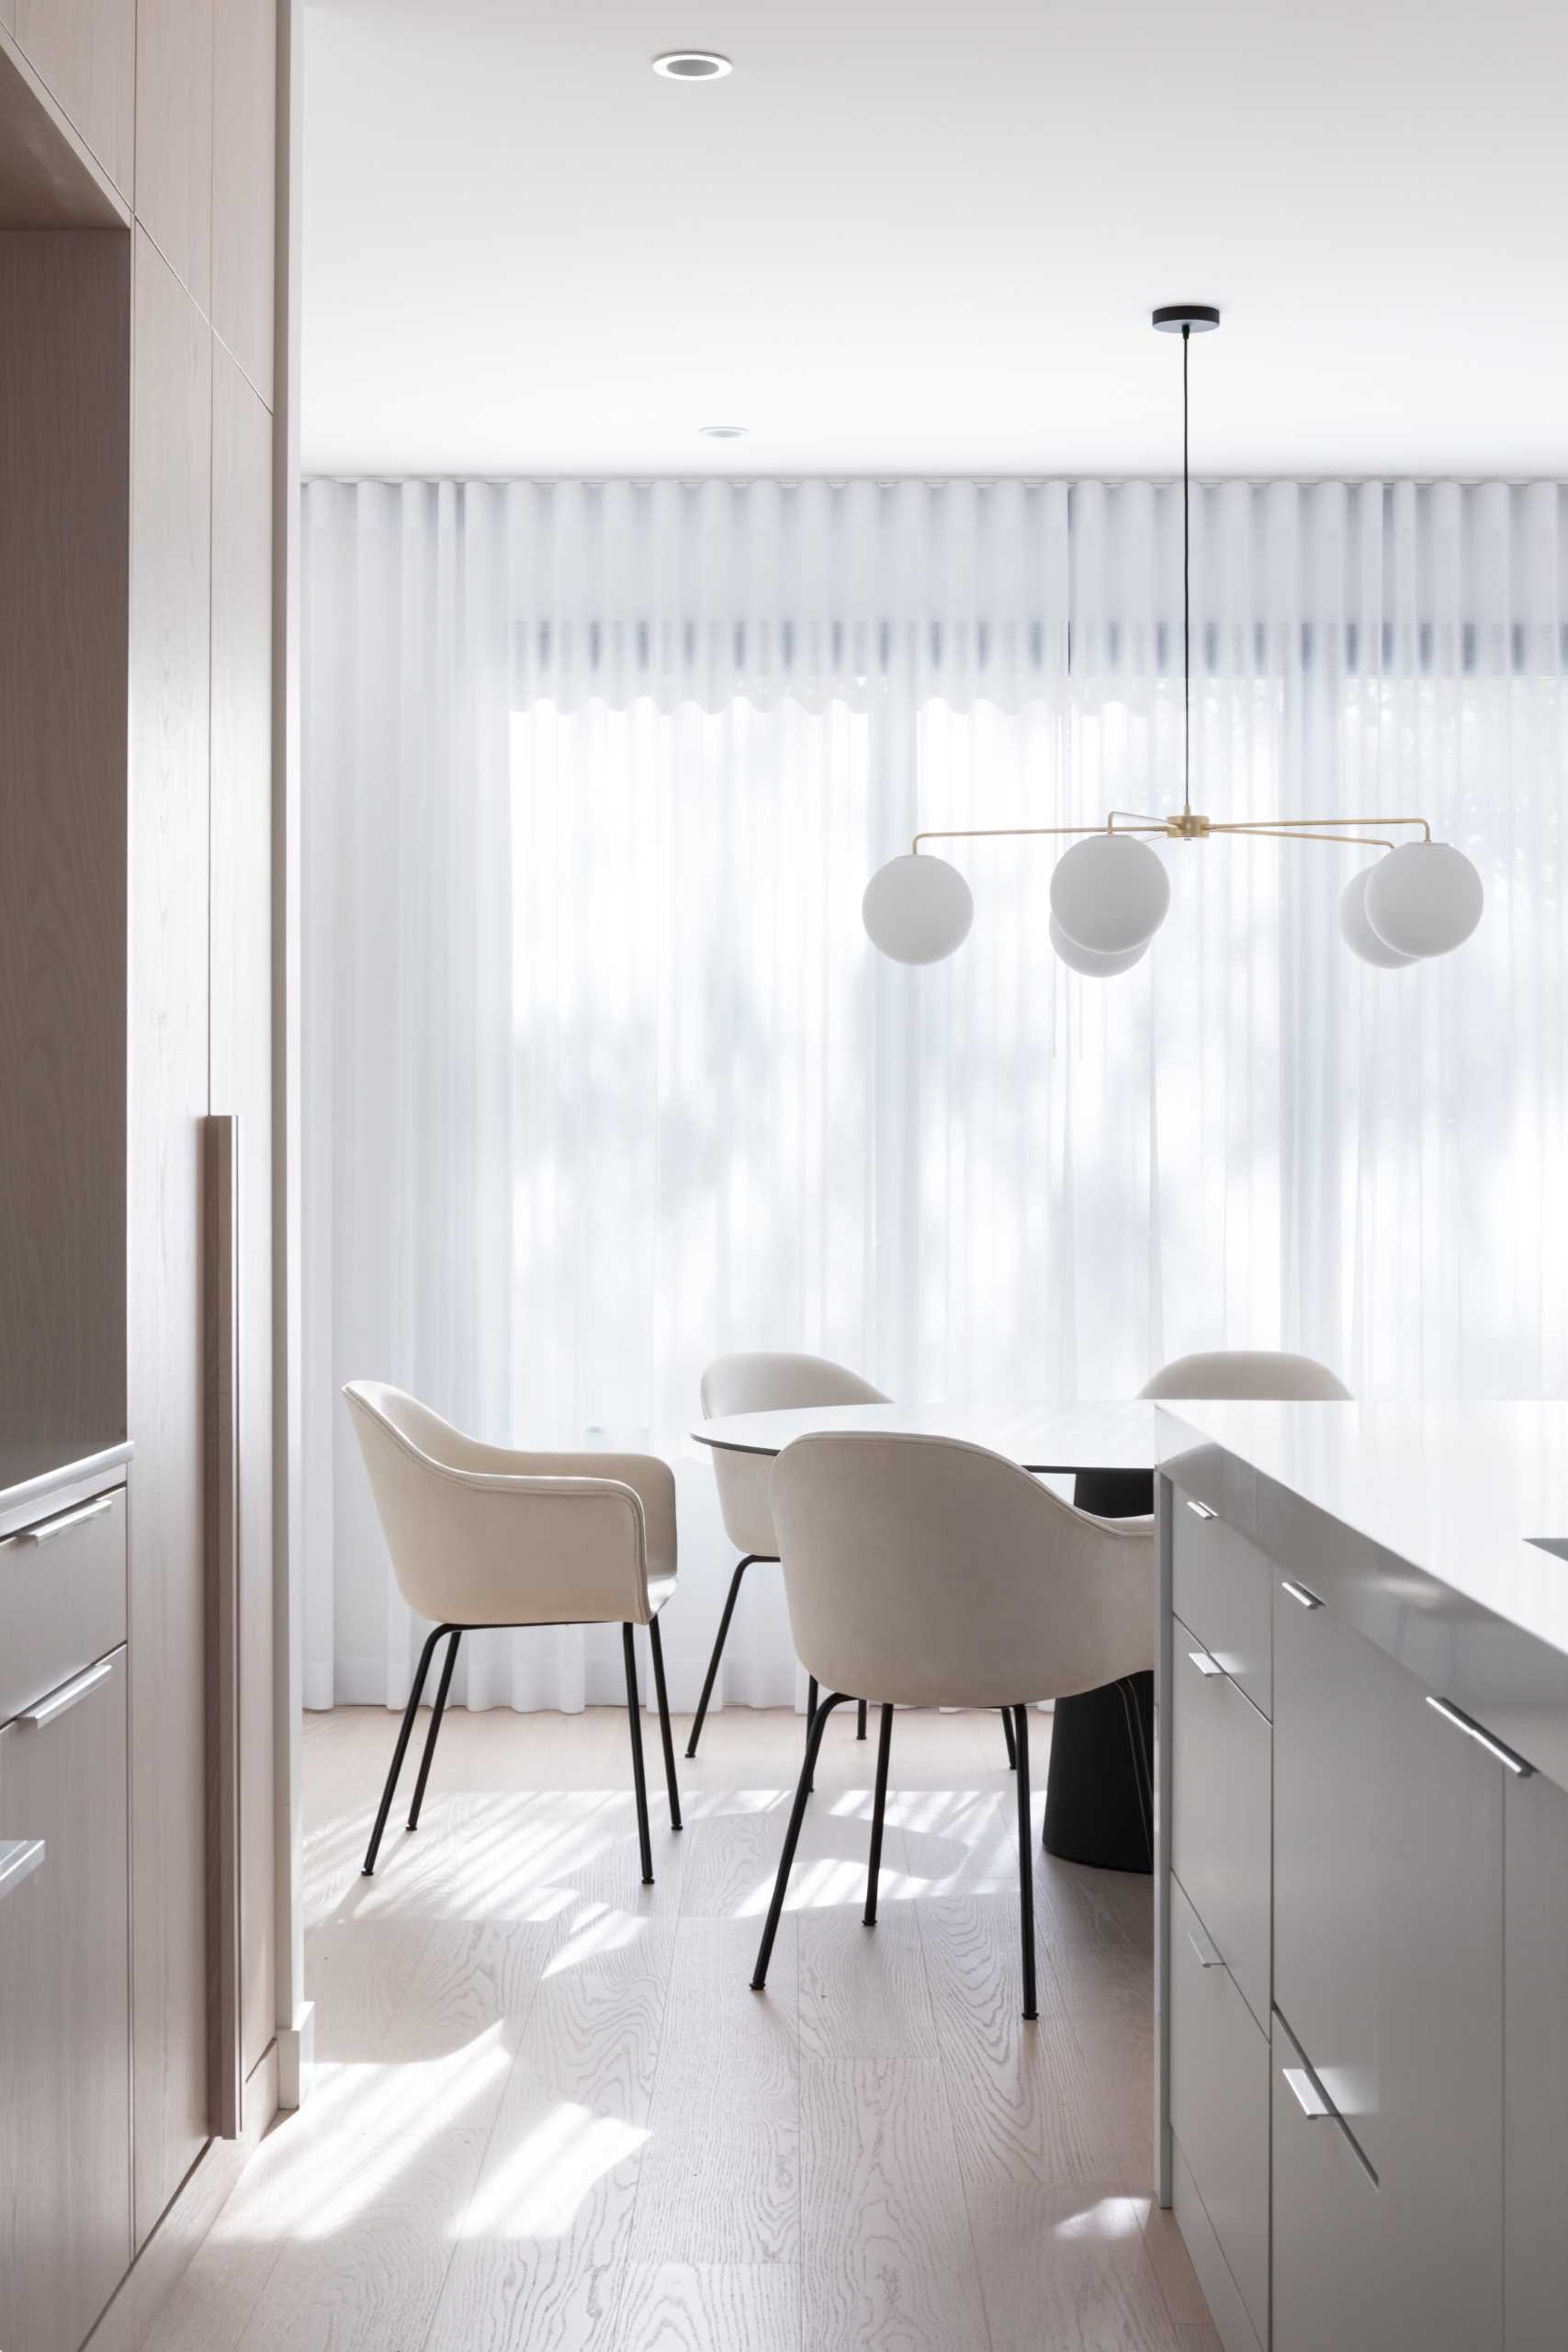 Sheer curtains bathe the dining room and kitchen with diffused sunlight from the front of the home.